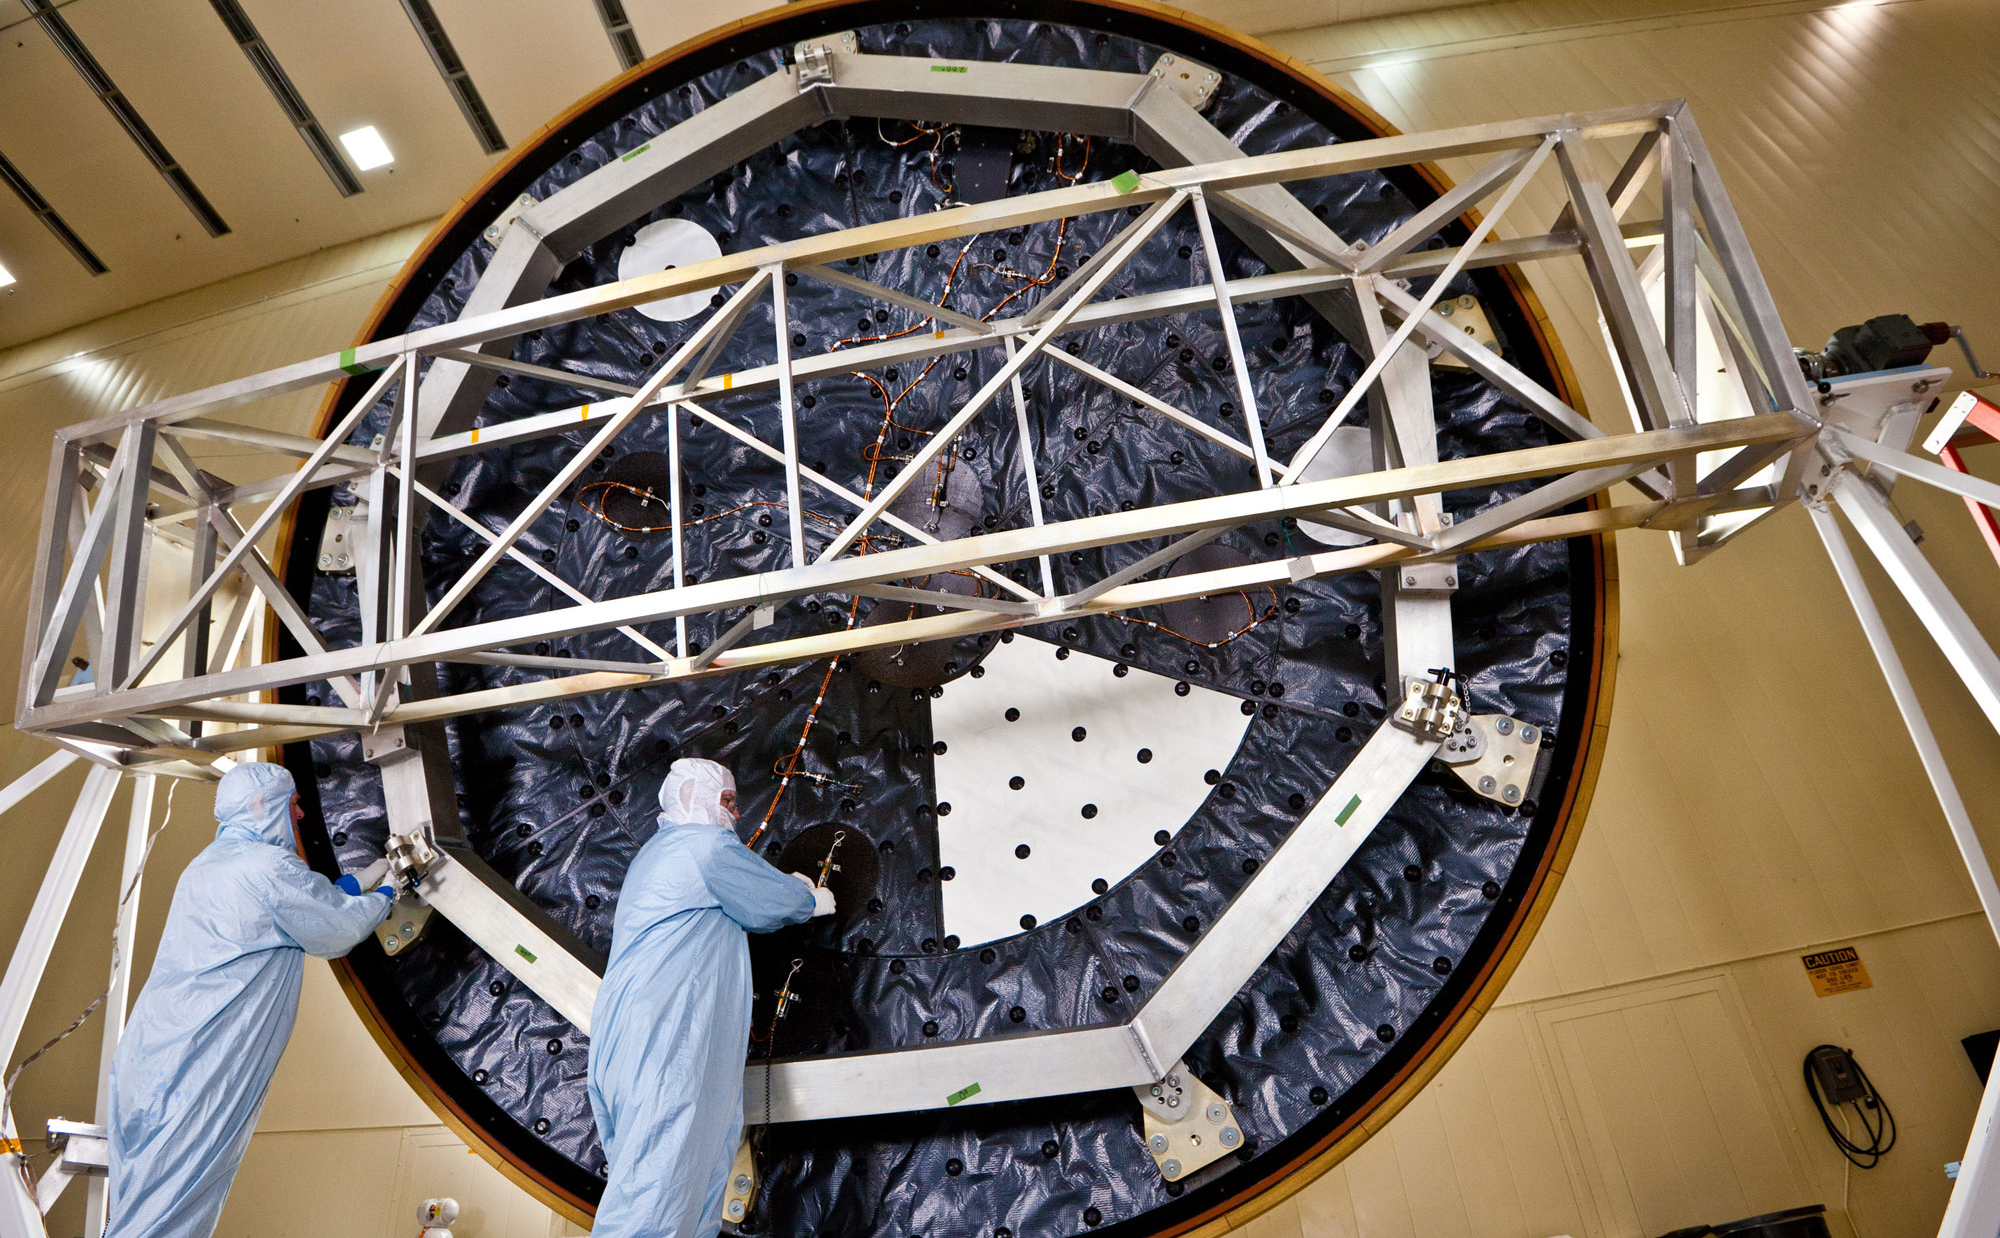 Technicians at Lockheed Martin Space Systems, Denver, prepare the heat shield for NASA's Mars Science Laboratory, in this April 2011 photo. With a diameter of 4.5 meters (nearly 15 feet), this heat shield is the largest ever built for a planetary mission.